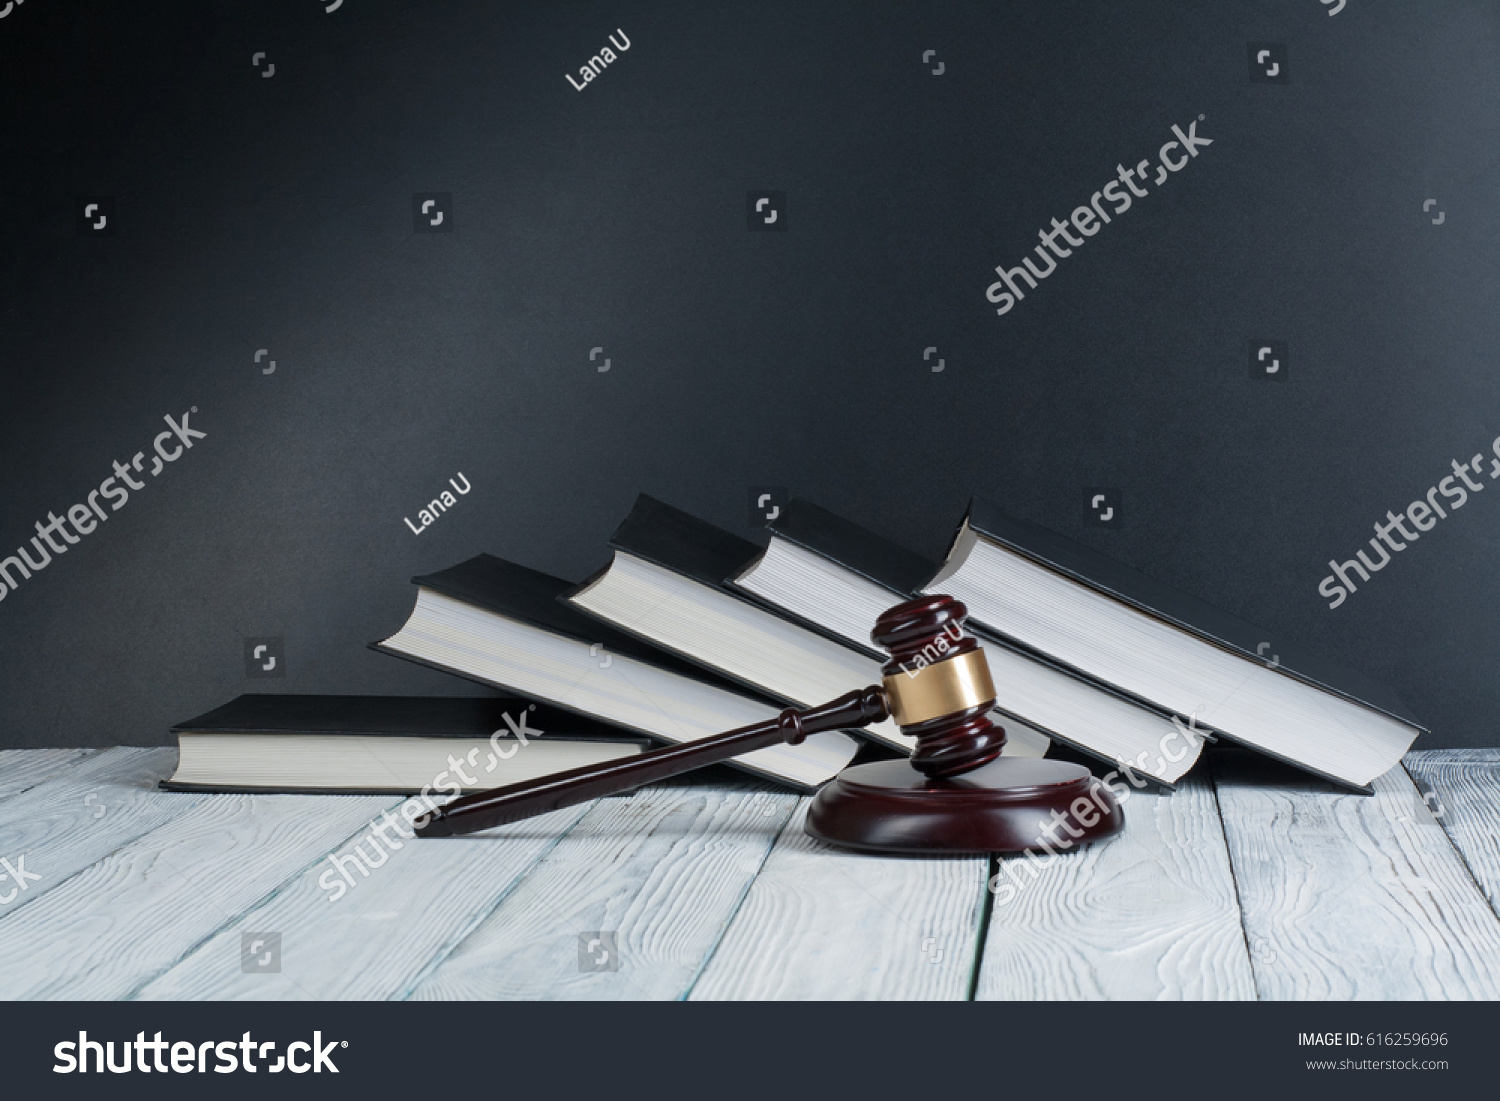 Law concept - Open law book with a wooden judges gavel on table in a courtroom or law enforcement office on blue background. Copy space for text #616259696